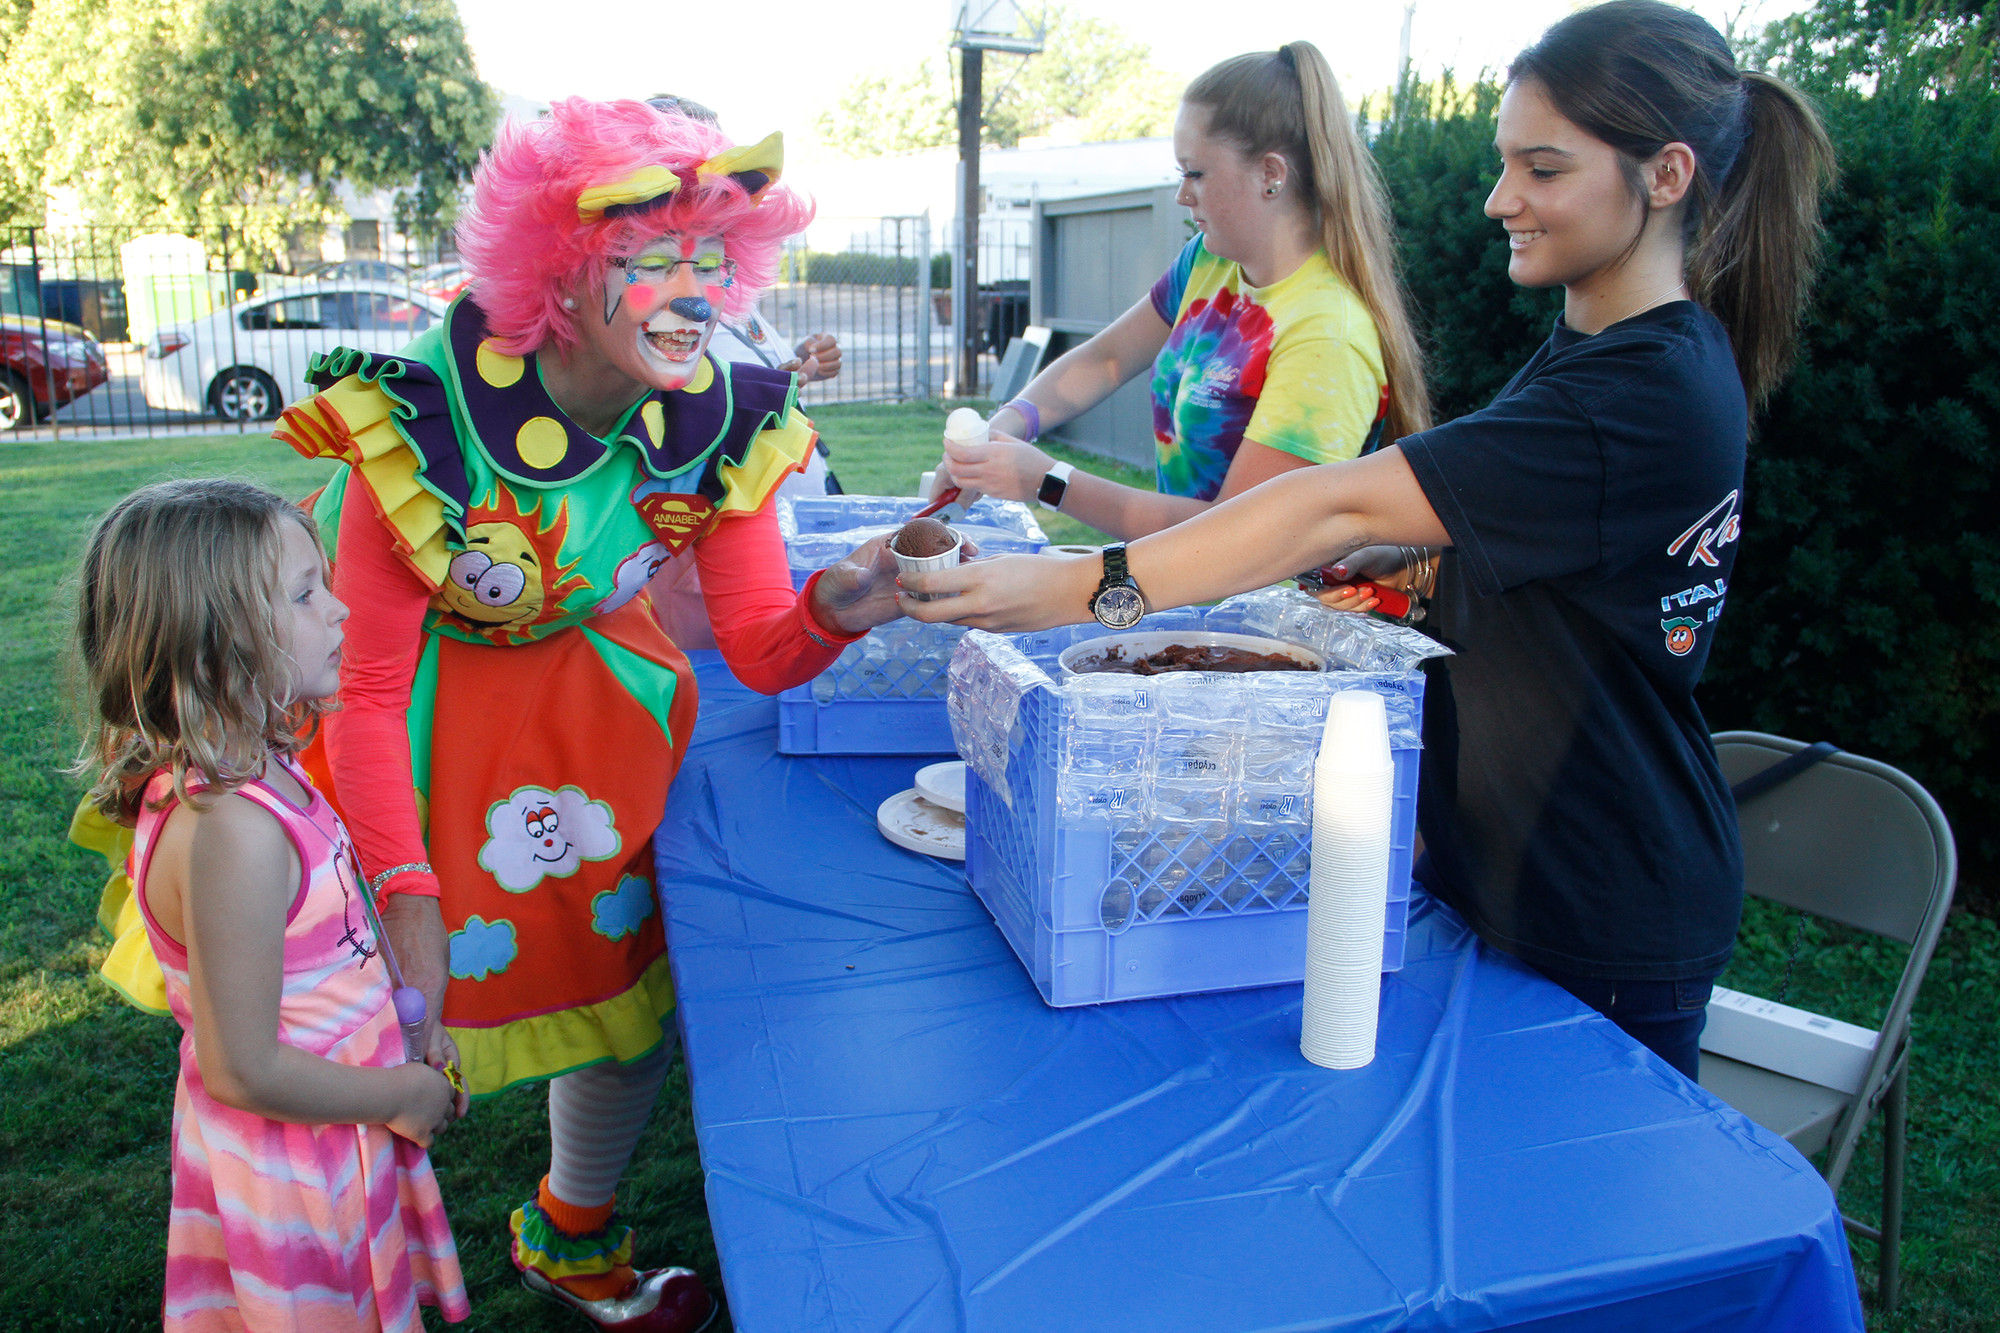 Gabriella Fuschetto, of Ralph’s Italian Ices, handed a chocolate ice to Annabel the clown and Zoey Rotolo at National Night Out on Aug. 4.